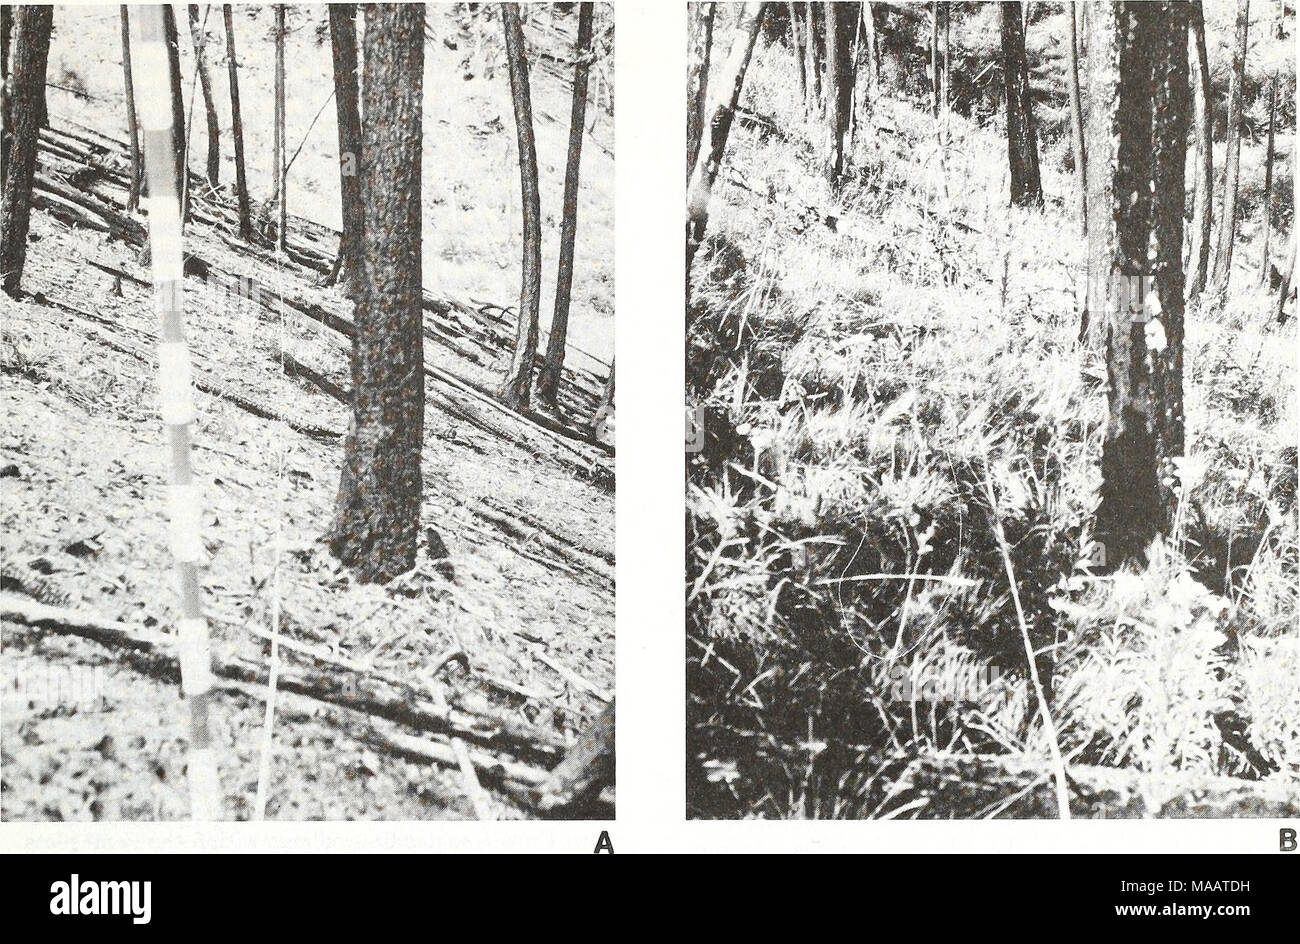 . Early postfire revegetation in a western Montana douglas-fir forest . Figure 8.—Stand 24 on the west edge of the fire is an example of an area that did not have seeded grass initially, (a) Stand 24 in July 1978; (b) stand 24 in August 1982. Table 6.—Conifer regeneration as counted in herbaceous vegetation plots within Pattee Canyon stands. Plot area is 6 yd^ (5 m2) per stand. Species unknown except as indicated (PSME = Pseudotsuga menziesii; PICO = Pinus contorta and LAOC = Larix occidentalis) Vegetation plots 1978 1978 1979 1982 Stand spring summer summer summer Number of seedlings 15 1 PSM Stock Photo